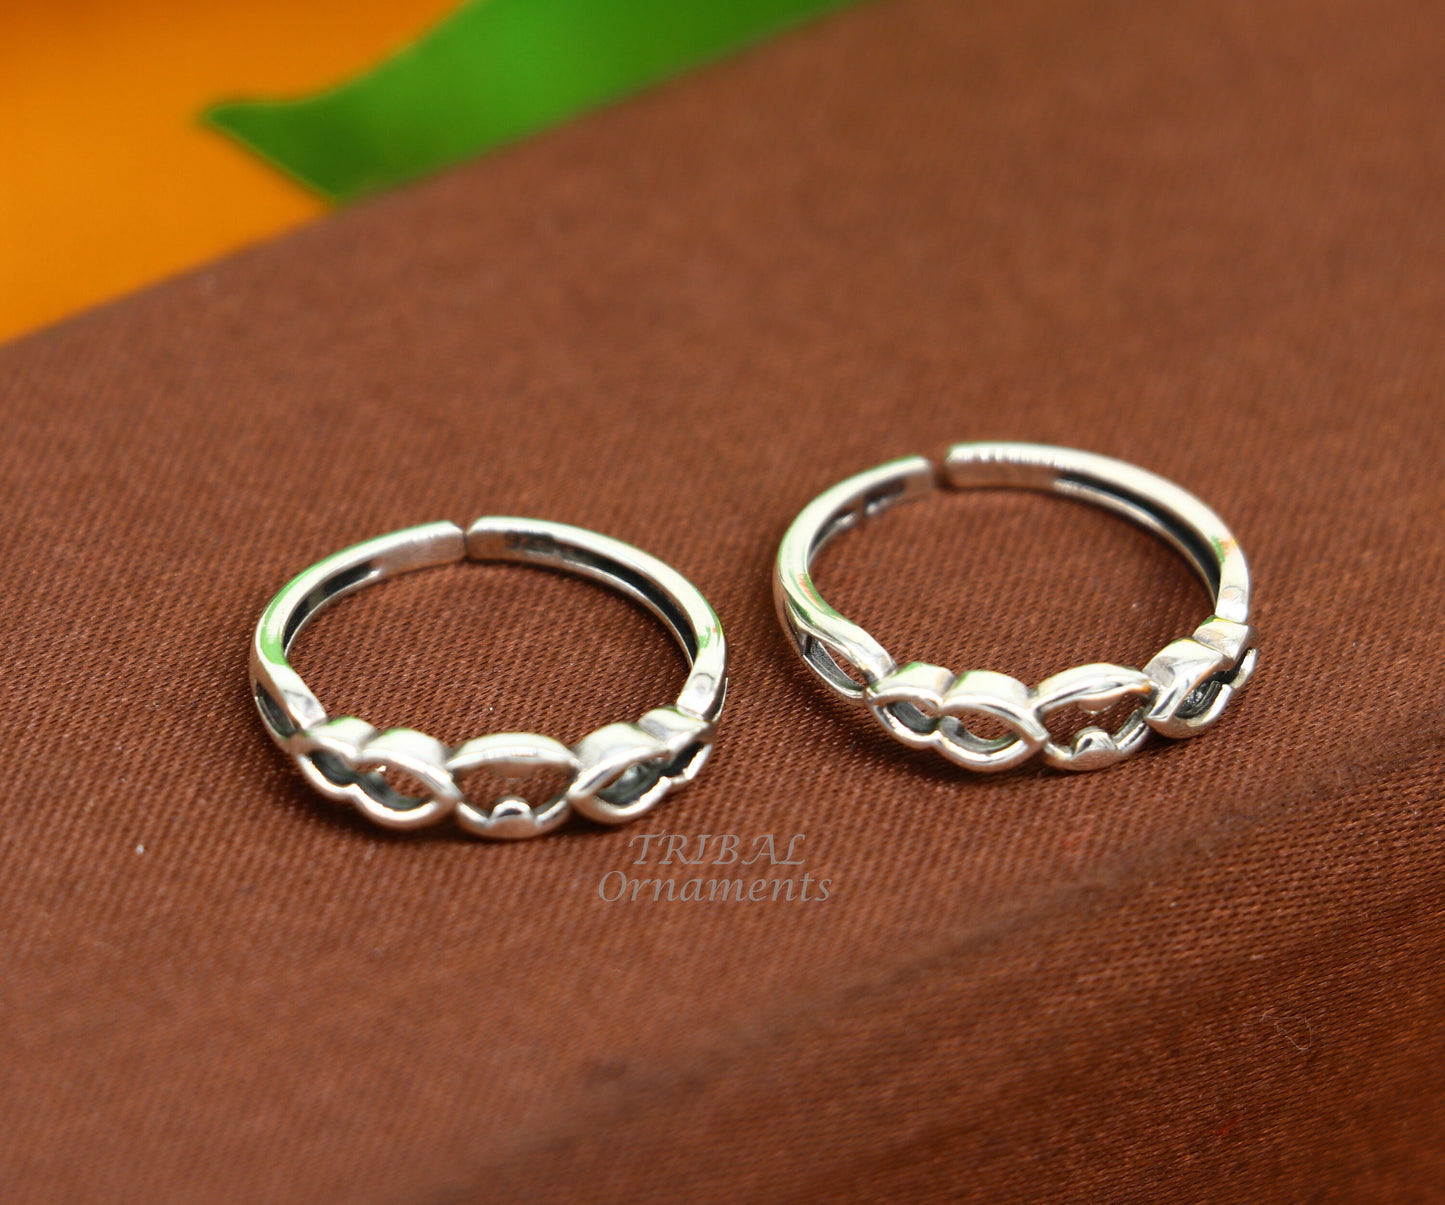 Unique design handcrafted 925 solid sterling silver toe ring, best brides personalized jewelry, wedding ethnic jewelry ytr21 - TRIBAL ORNAMENTS